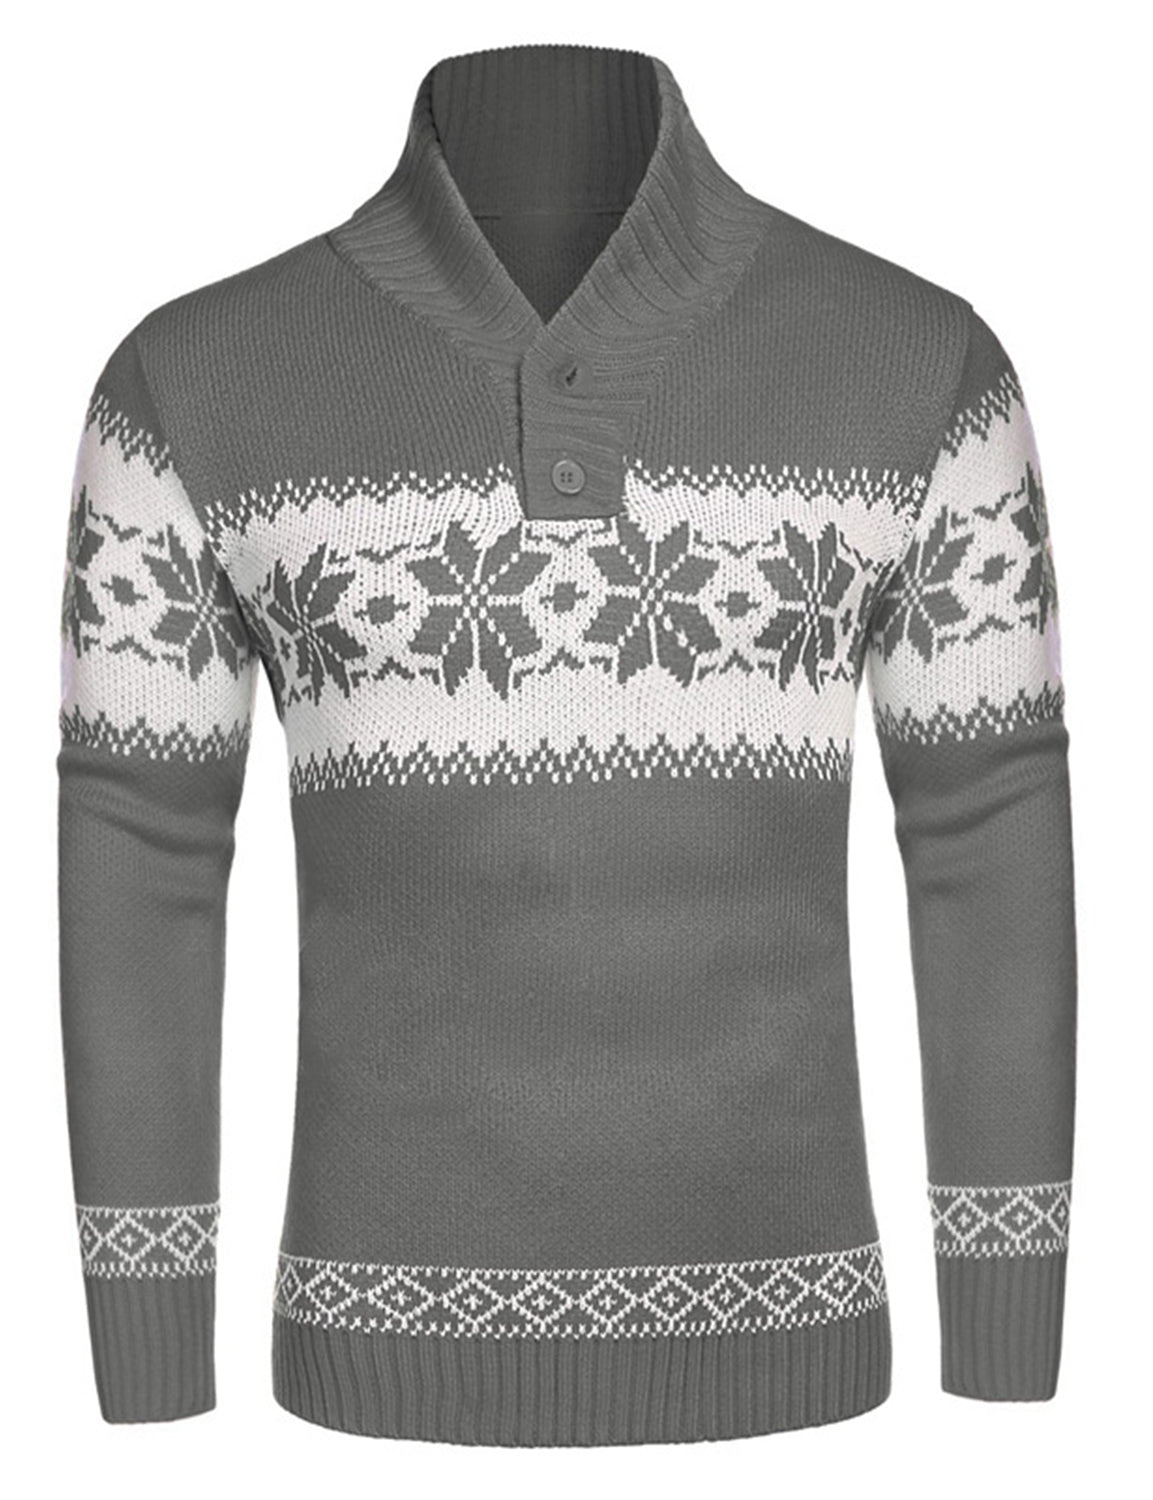 Men's Christmas Snowflake Print Jumper Button Up Long Sleeve Sweater